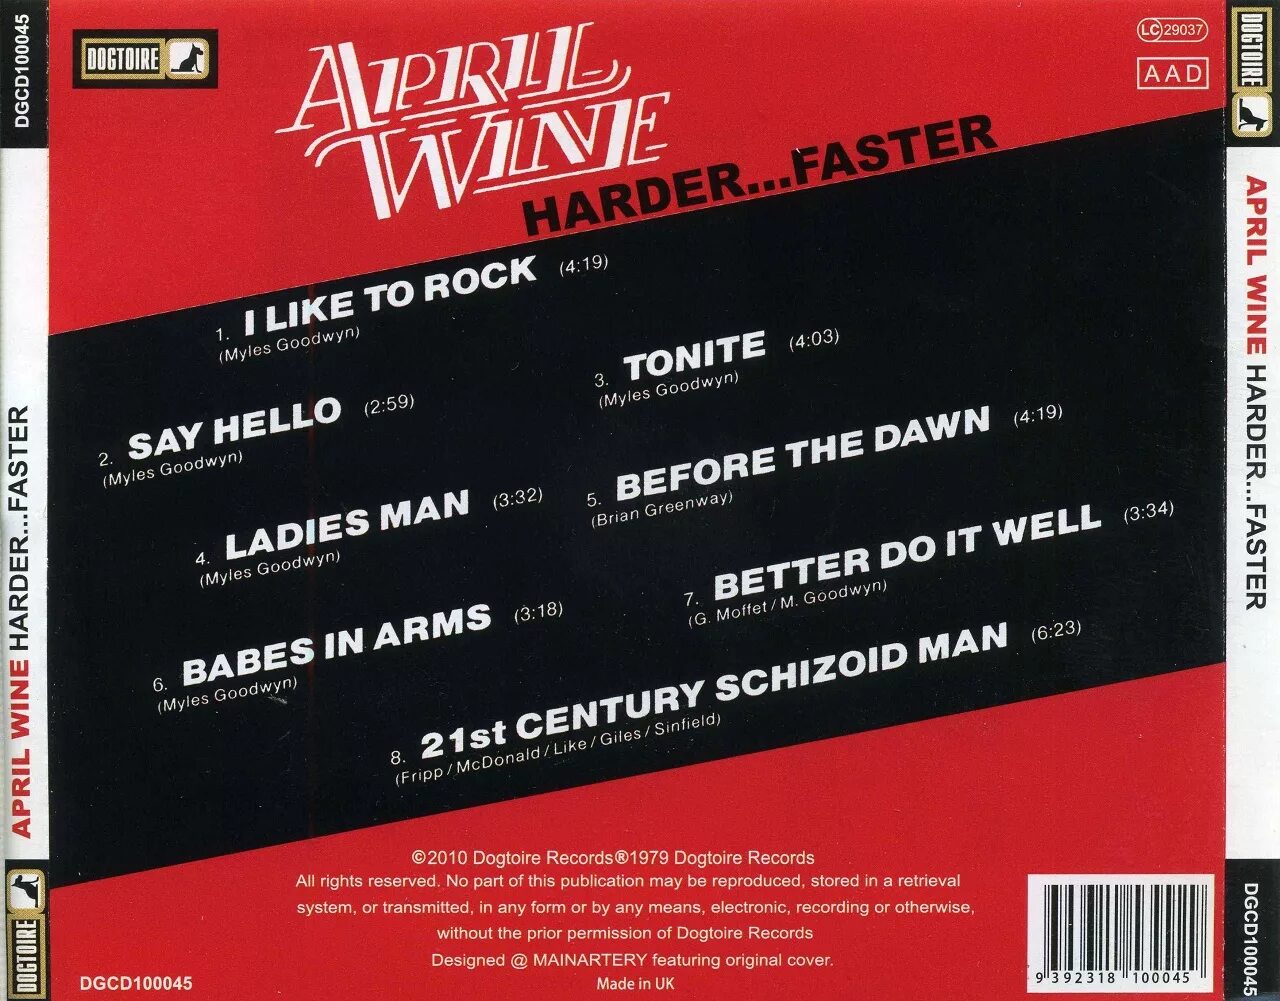 Faster and harder текст. April Wine "harder... Faster". April Wine CD. April Wine harder faster 1979. April Wine 1971 April Wine.